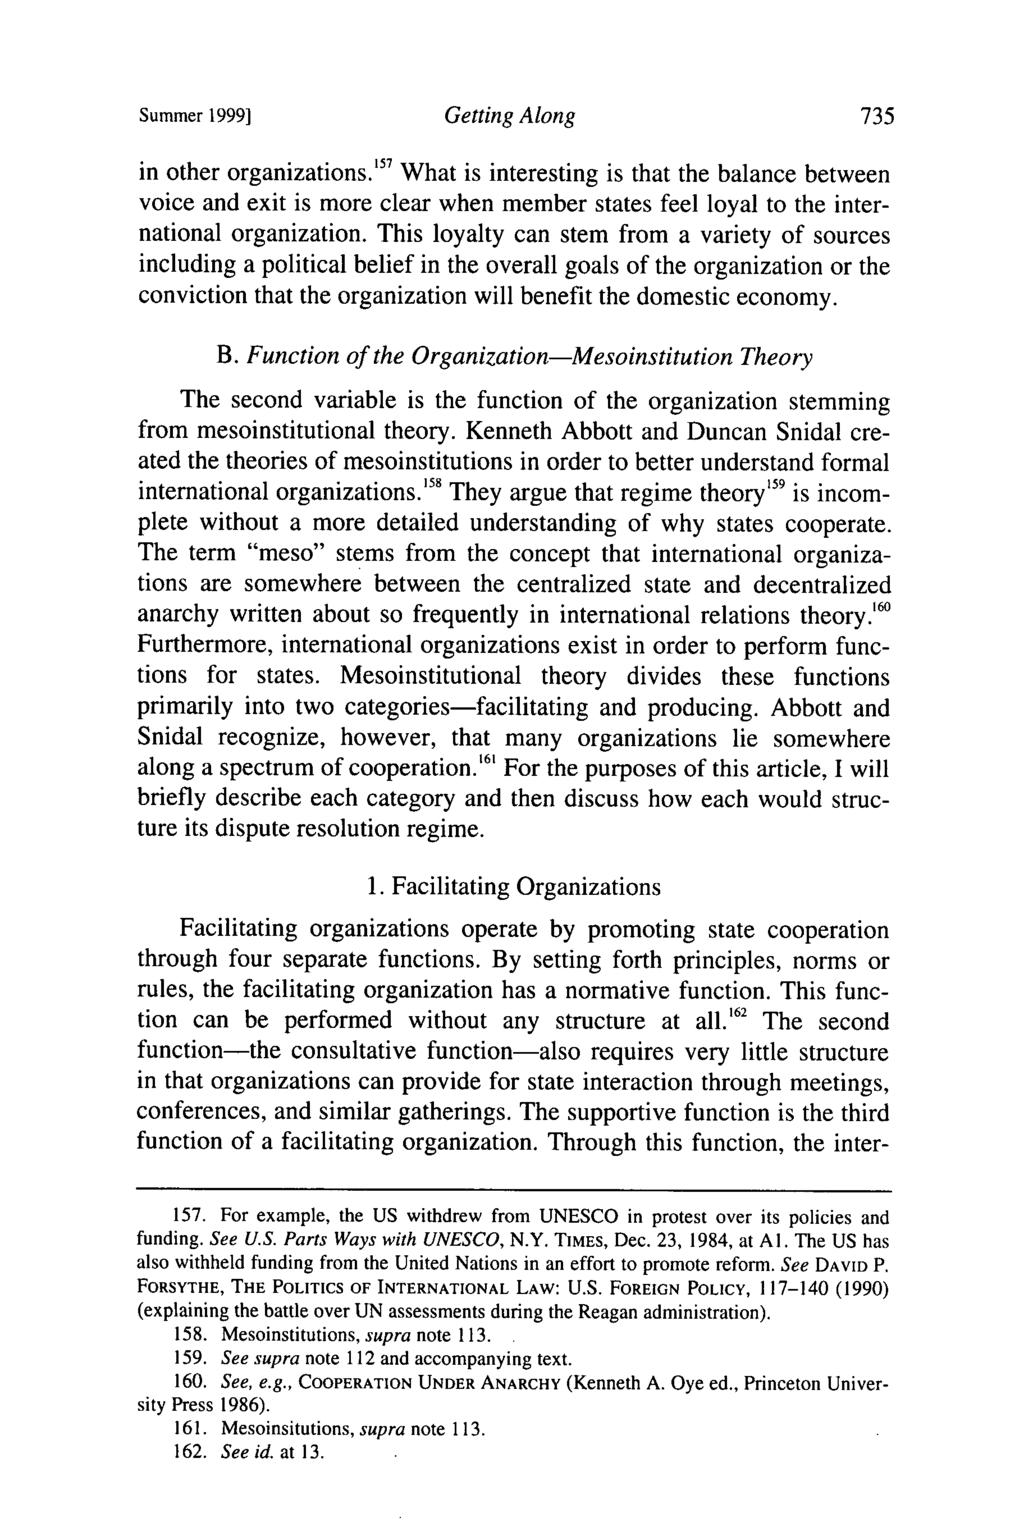 Summer 1999] Getting Along in other organizations.' 57 What is interesting is that the balance between voice and exit is more clear when member states feel loyal to the international organization.